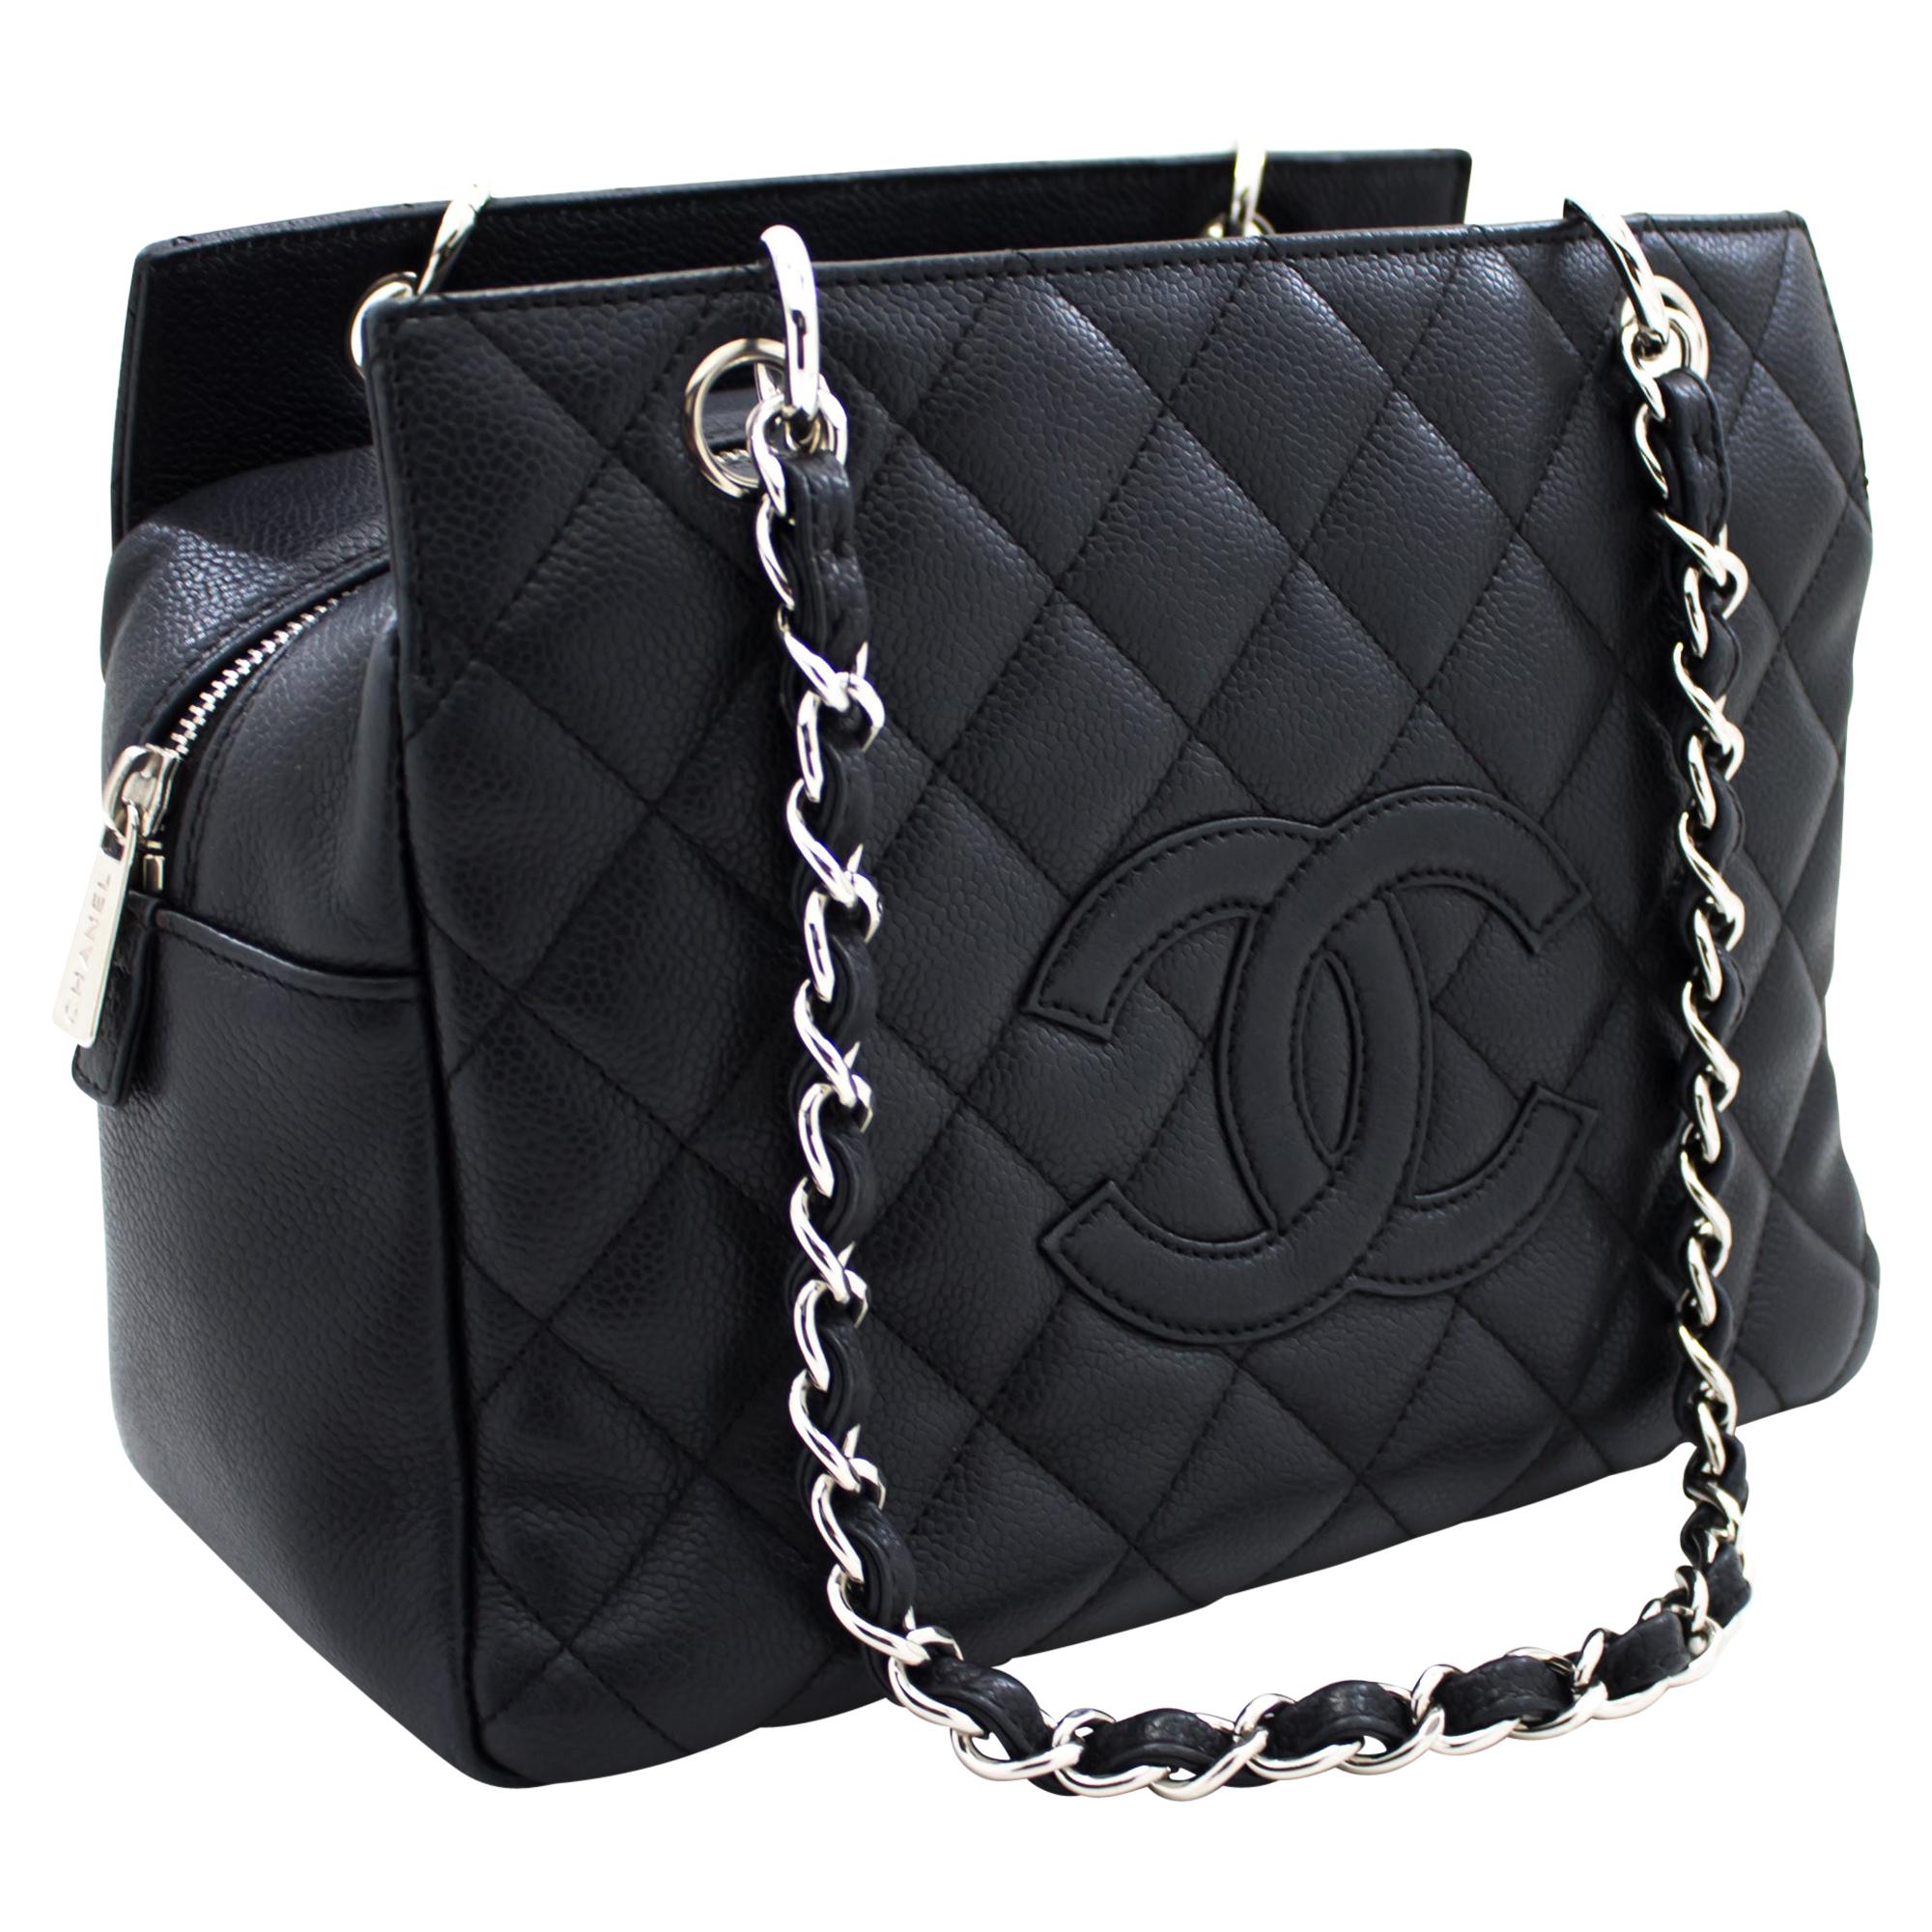 CHANEL Caviar Chain Shoulder Shopping Tote Bag Black Silver Leather